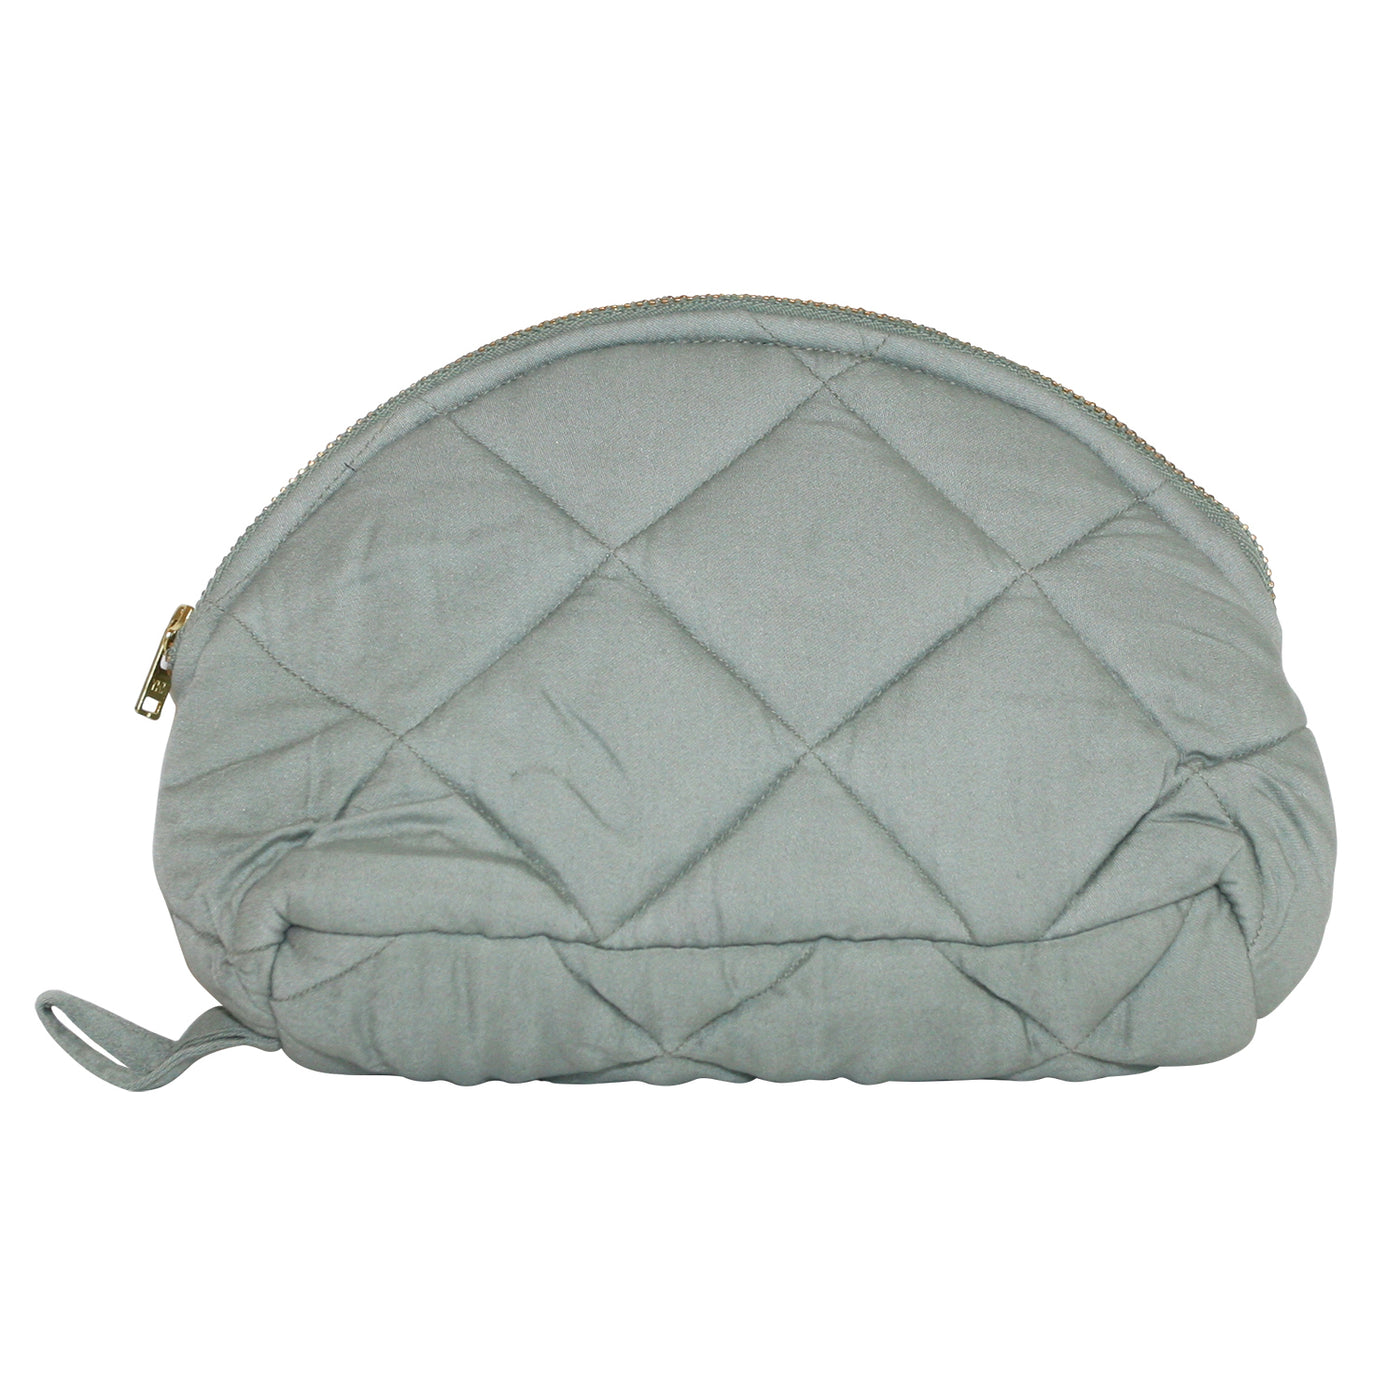 Our Isabel make-up purse is made in quilted lyocell fabric. Sustainable accessories